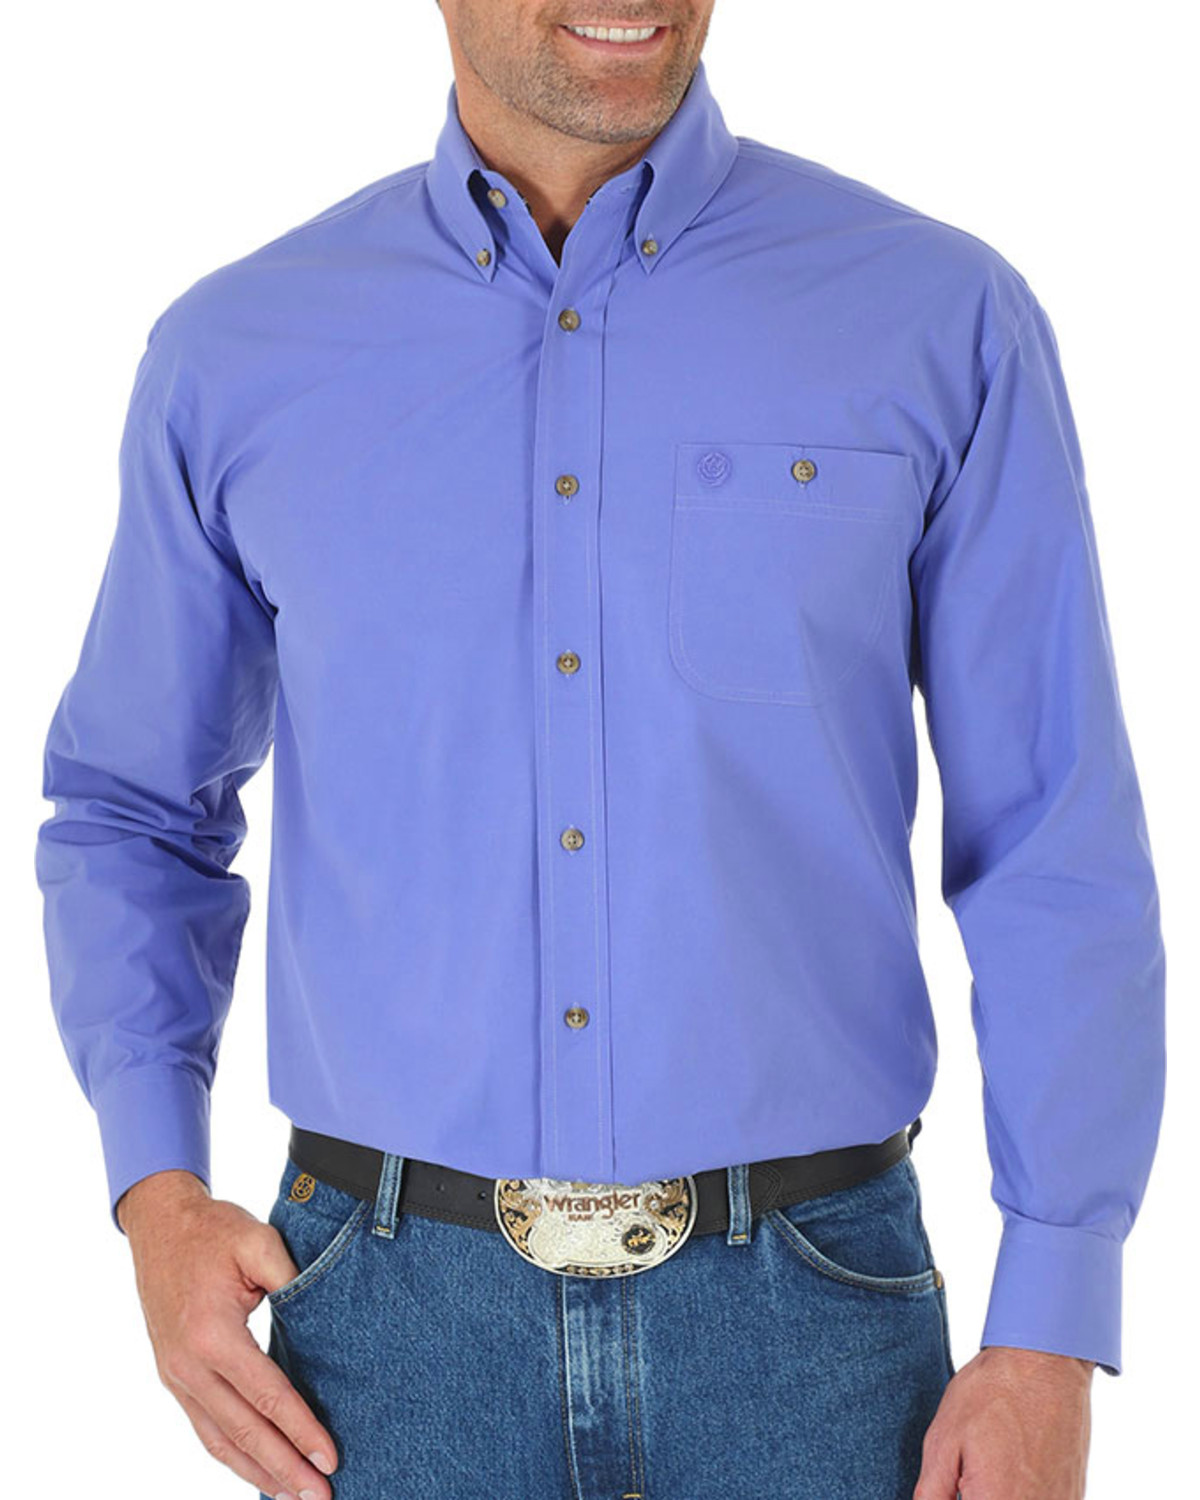 George Strait by Wrangler Men's Solid Long Sleeve Button Down Western Shirt